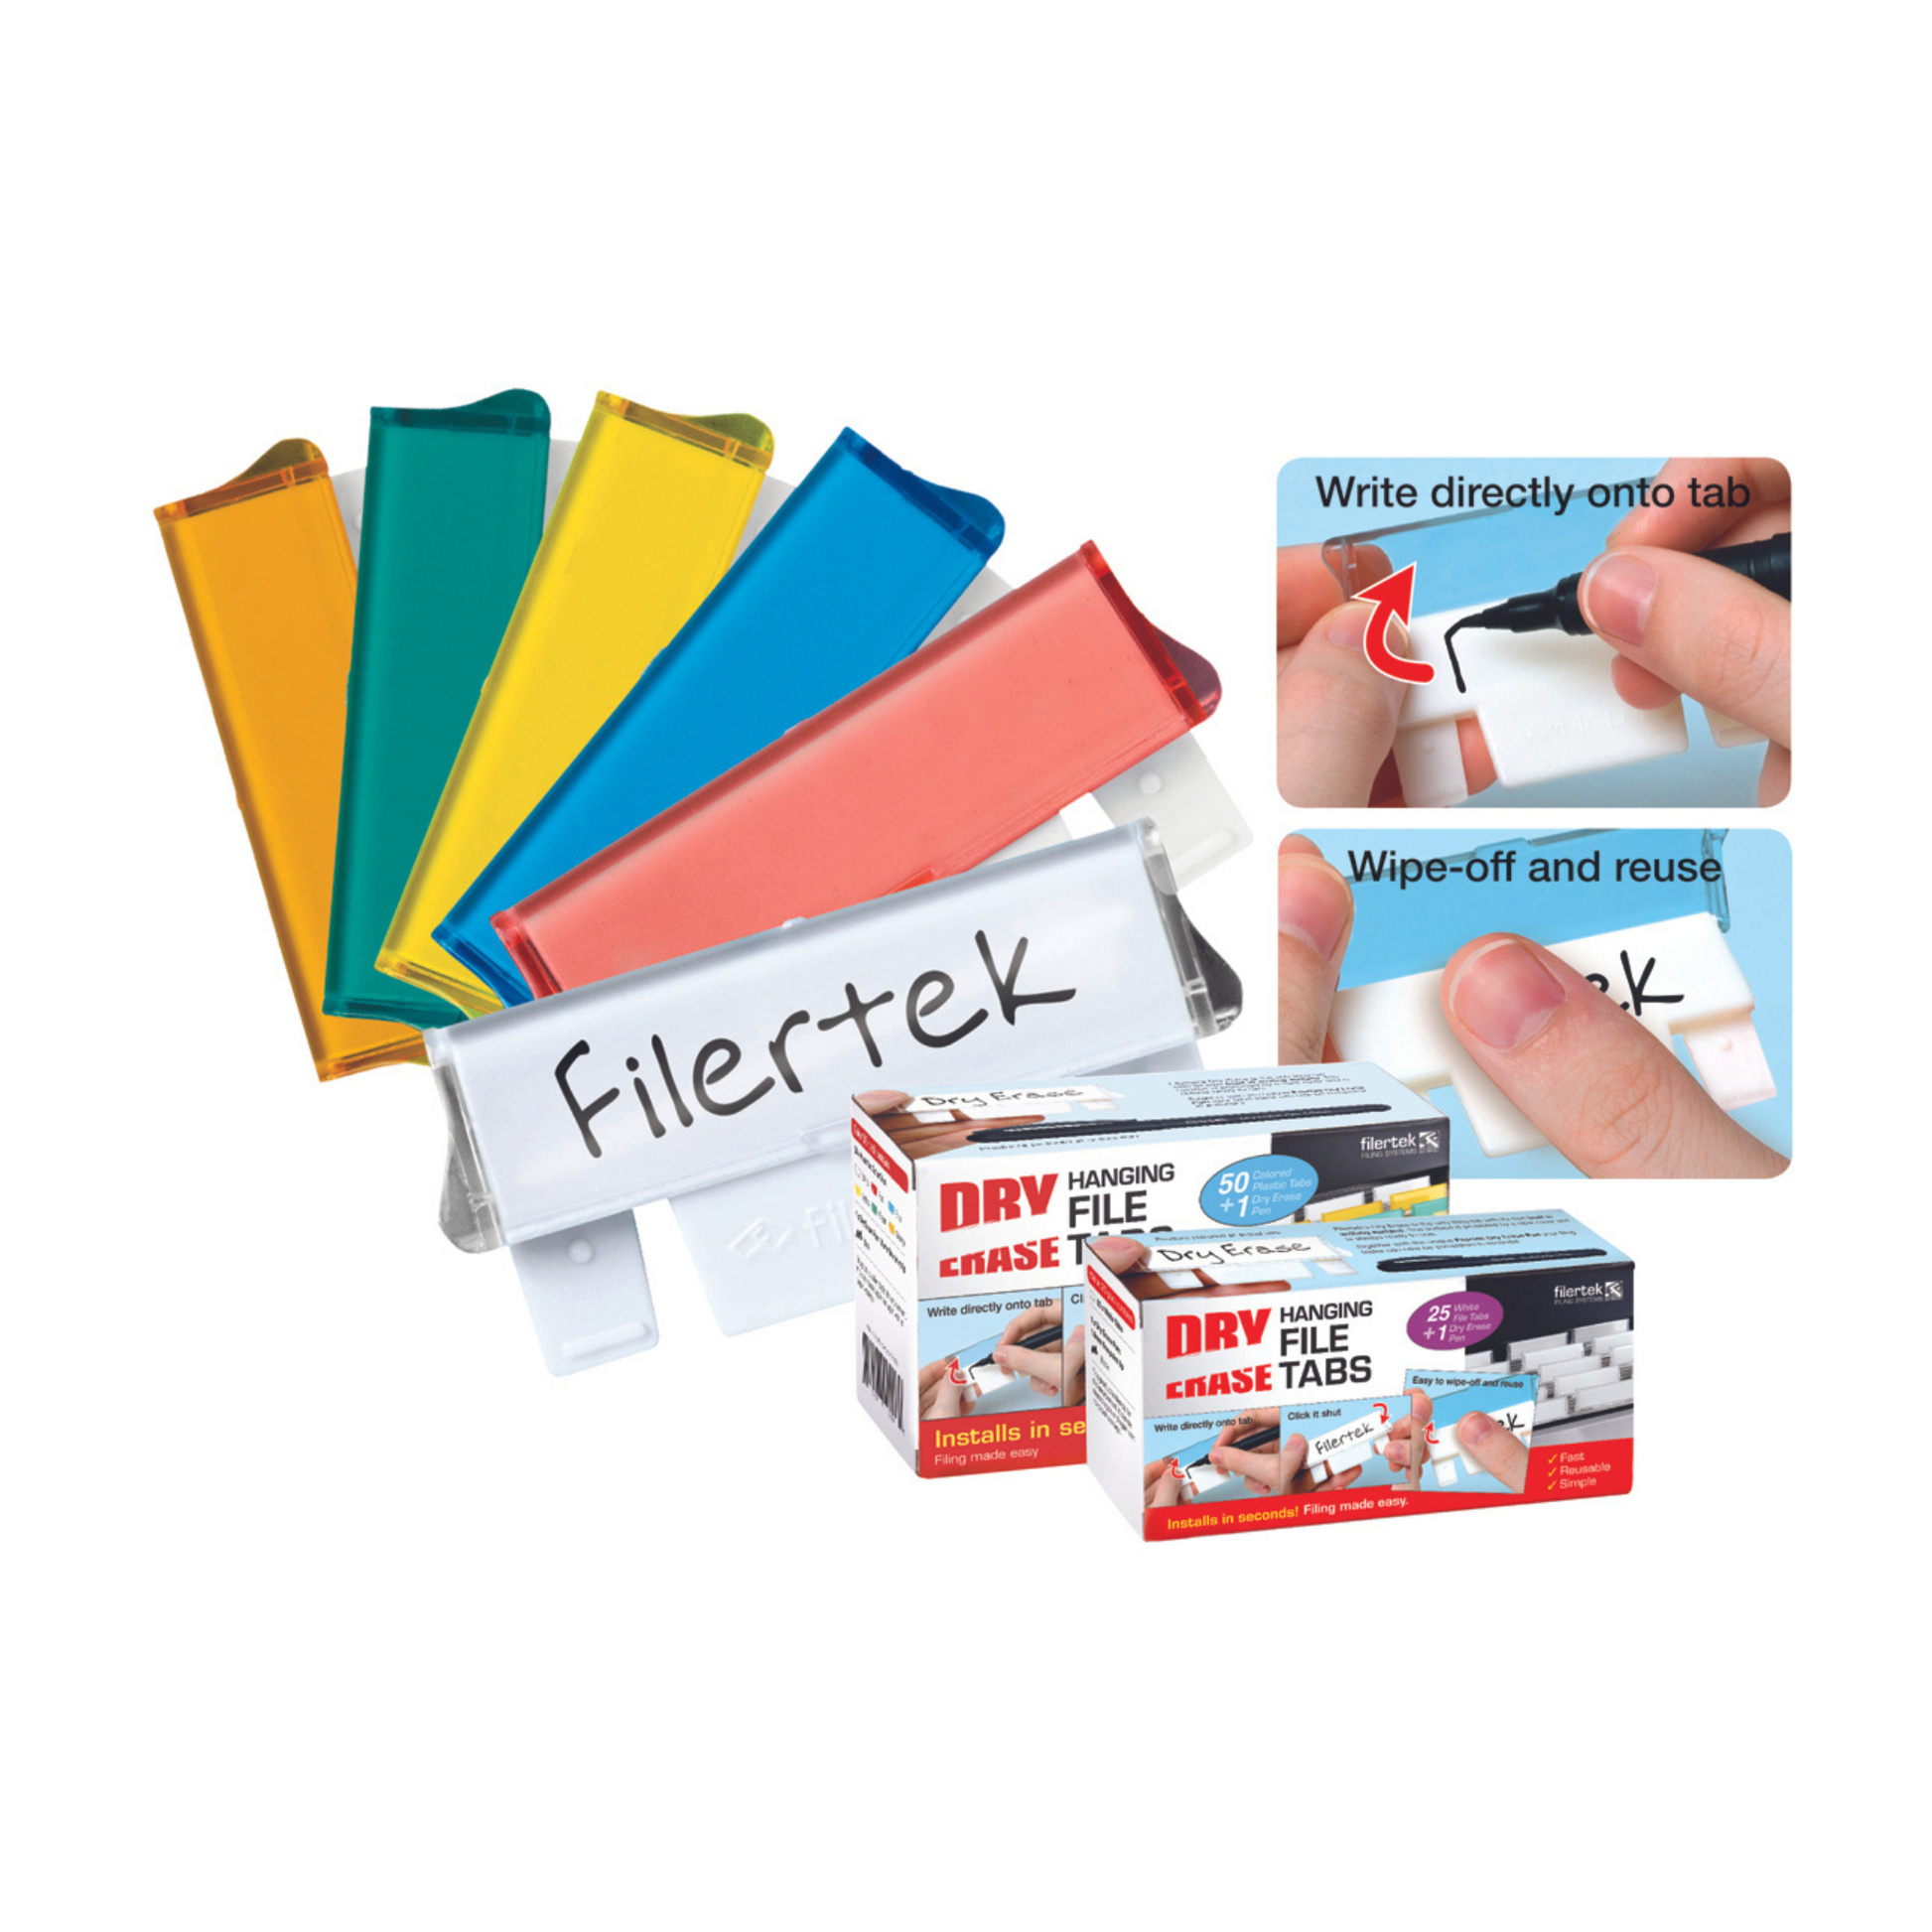 A set of dry erase filing tabs, displayed in an array of colors such as green, yellow, blue, and red, with one tab labeled 'Filertek' in marker. Instructions on how to write and wipe off for reuse are shown alongside images of the tabs being used, highlighting their functionality and reusability.